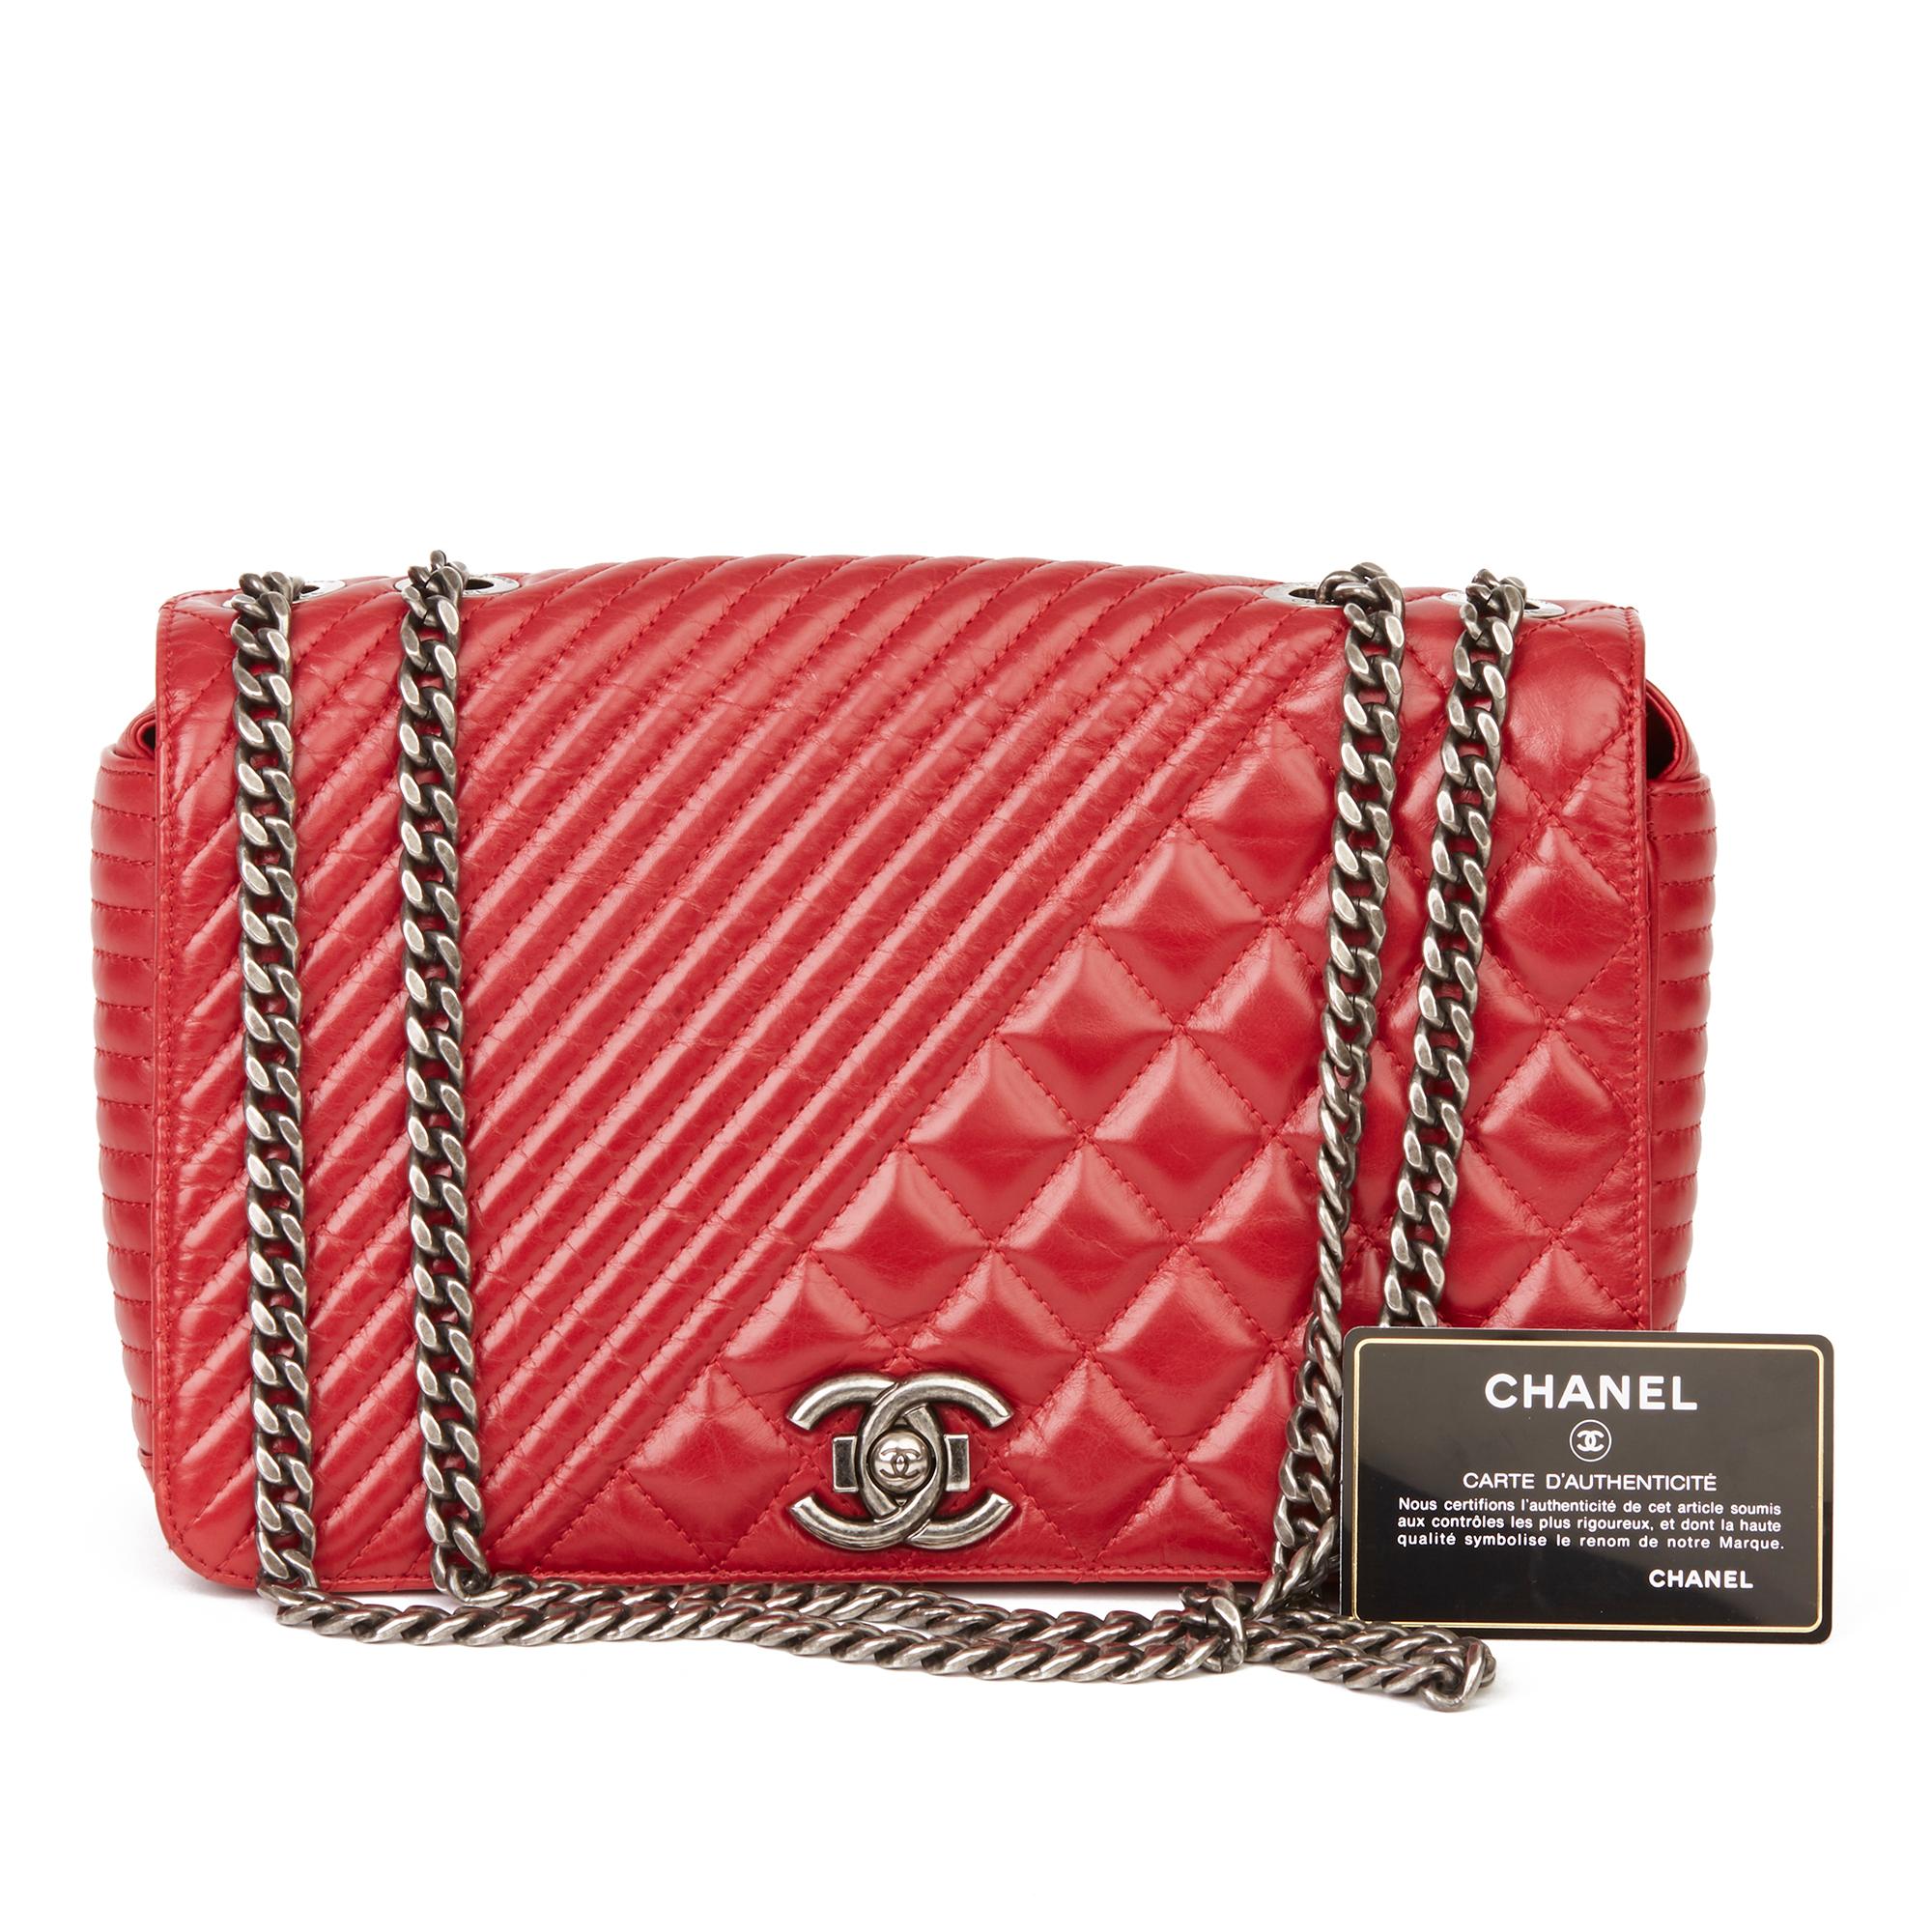 2014 Chanel Red Quilted Glazed Calfskin Leather Medium Coco Boy Flap Bag  7